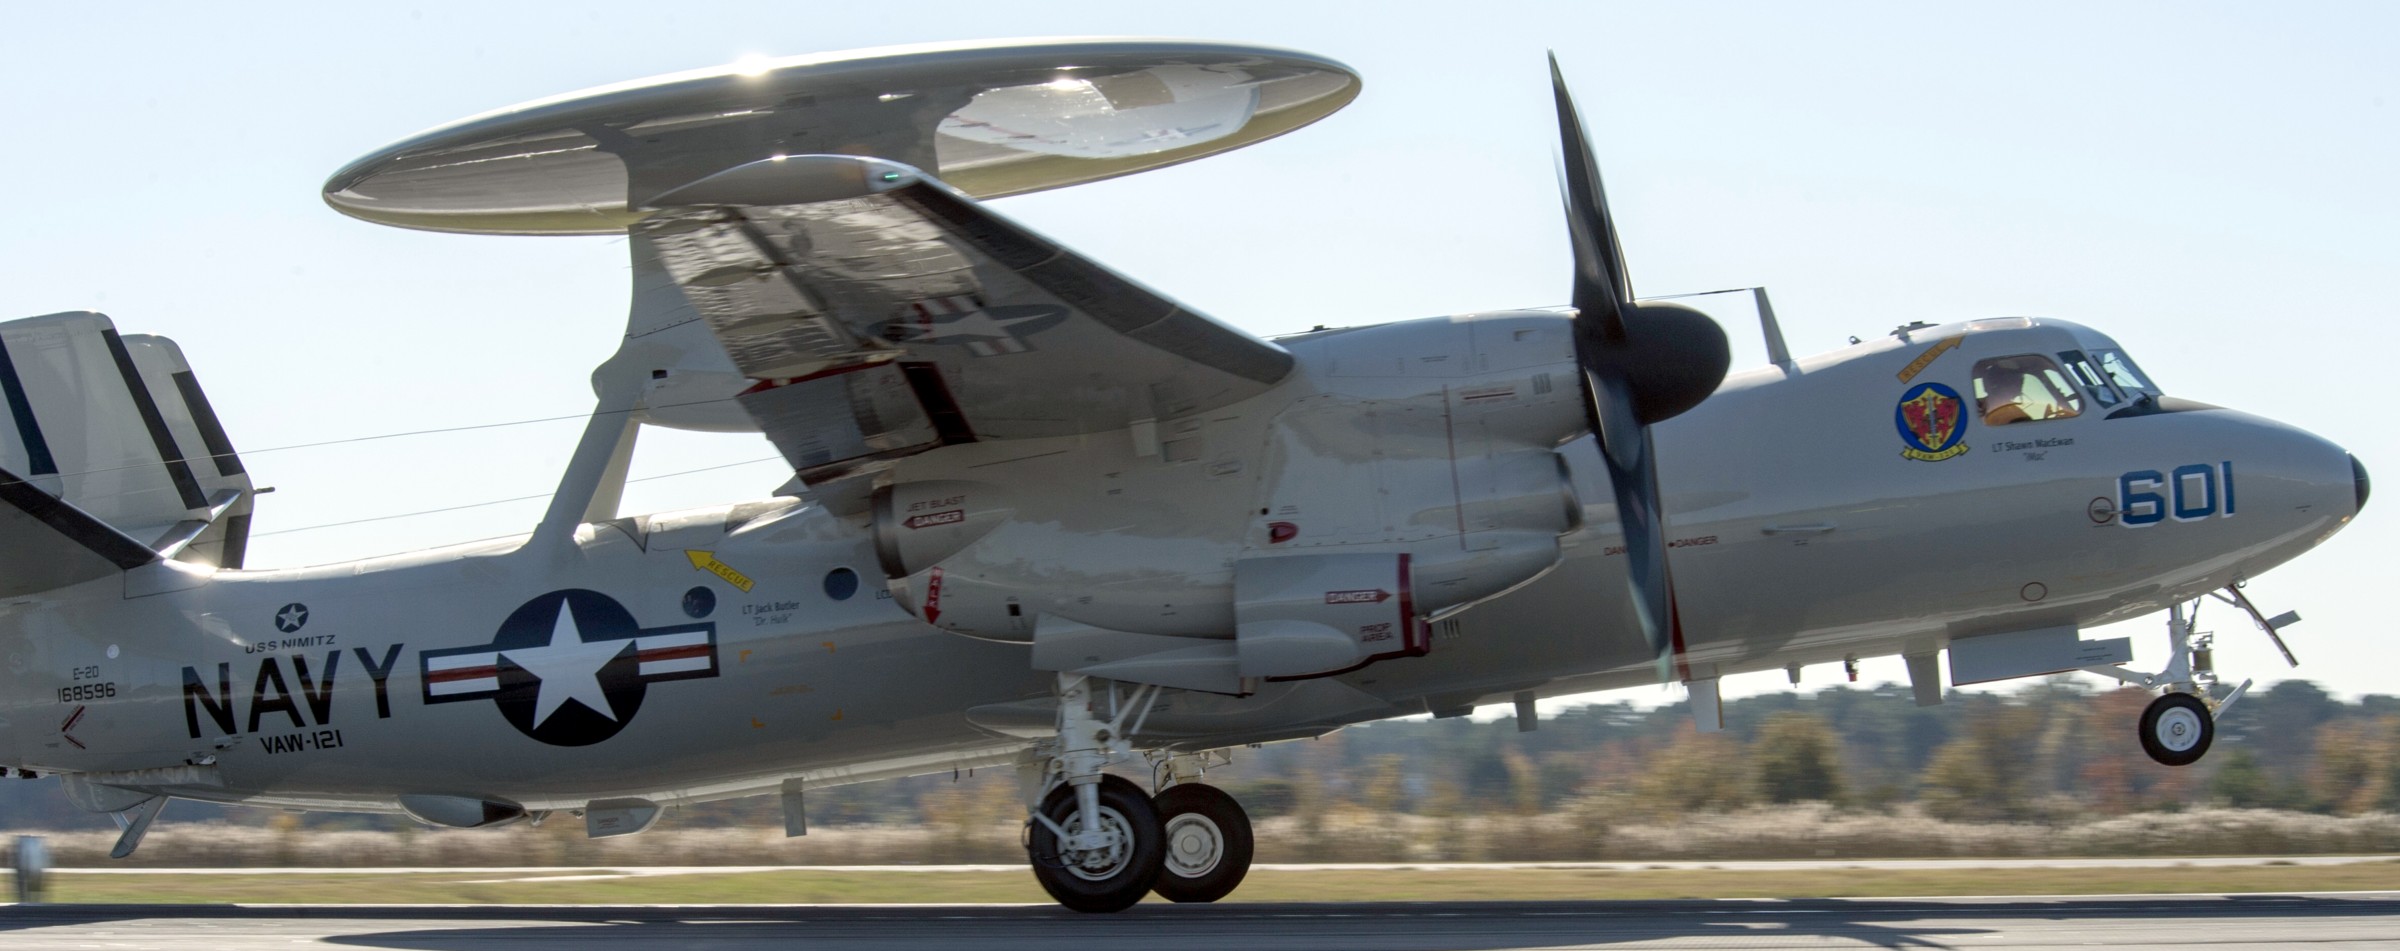 vaw-121 bluetails carrier airborne early warning squadron us navy e-2d advanced hawkeye nas norfolk virginia 39